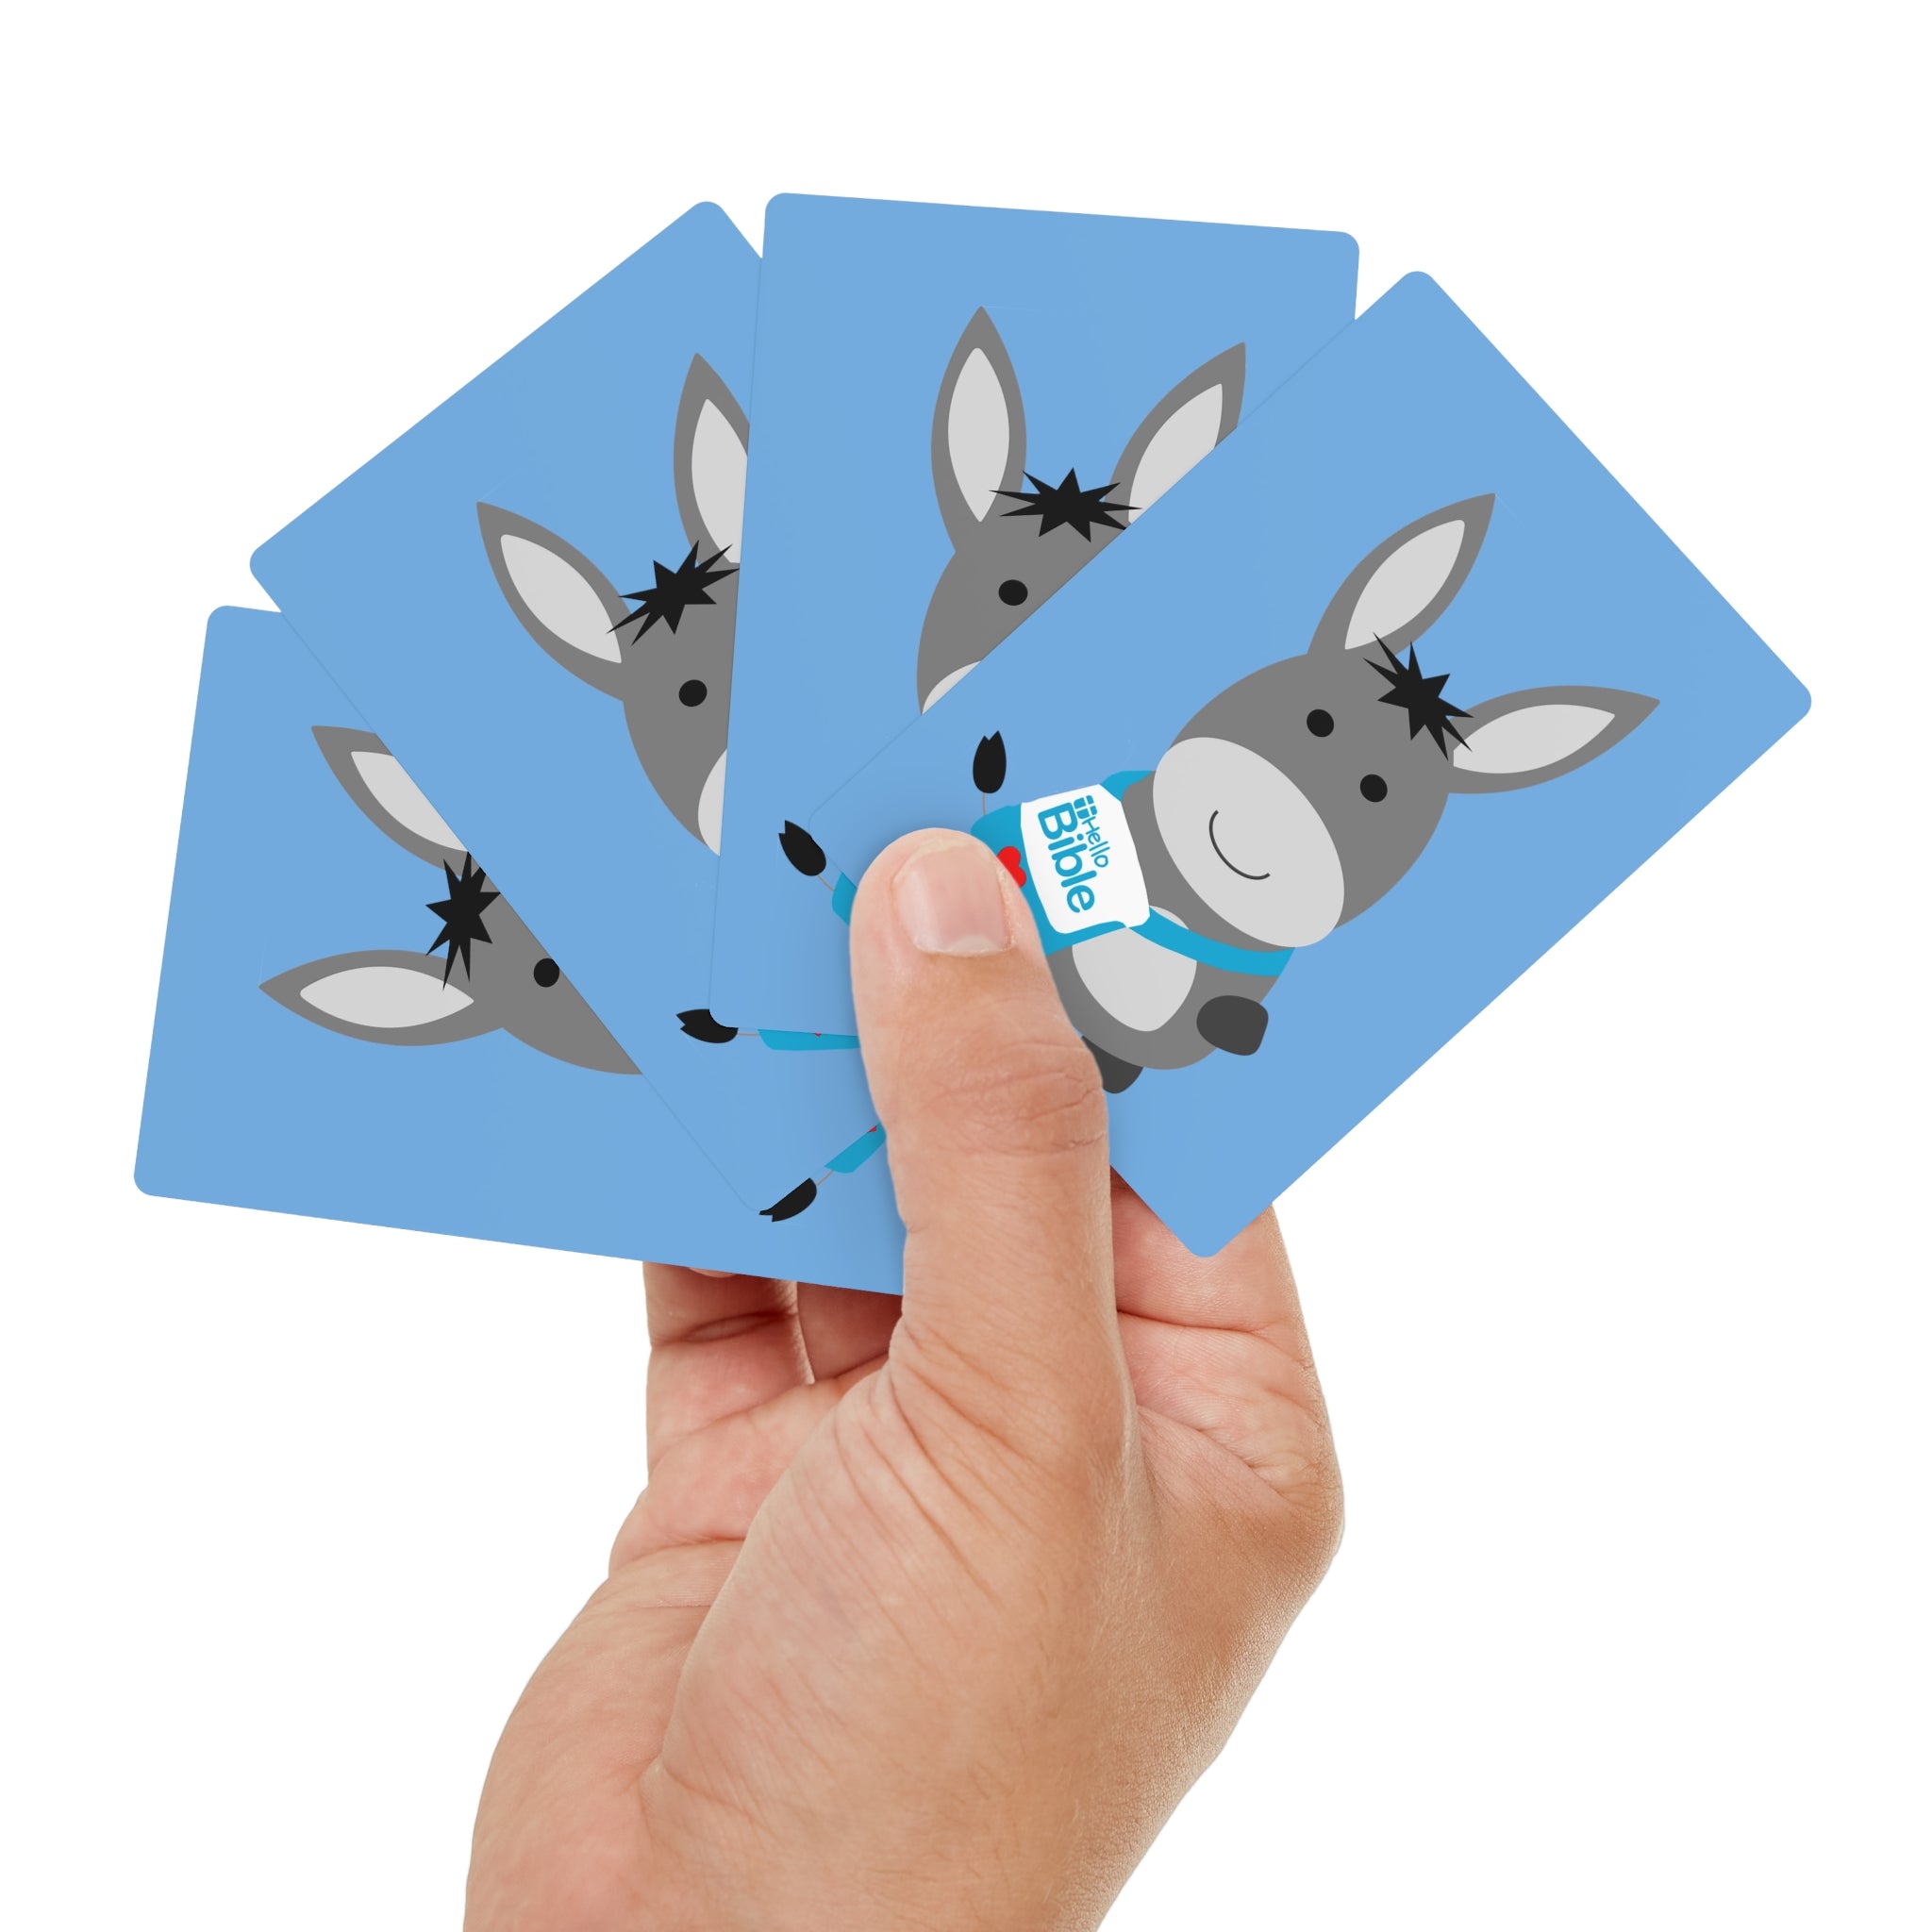 Danny's "Go Fish" Game Cards